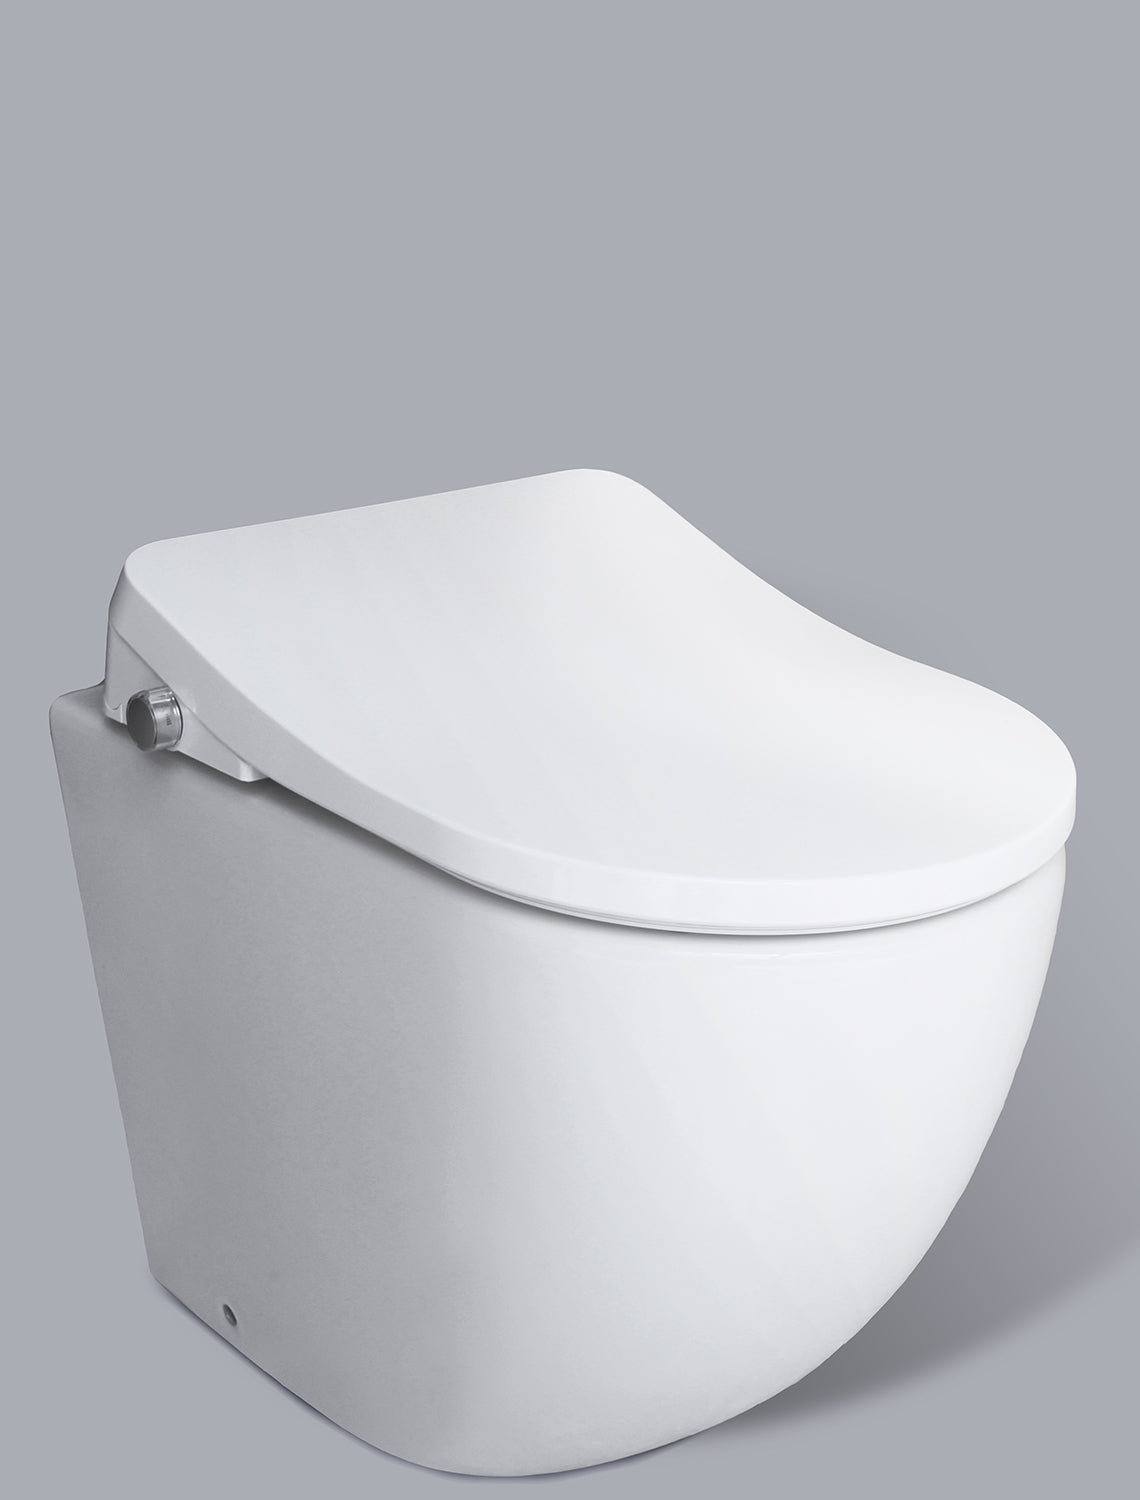 GALLARIA DANZA PULSE RIMLESS WALL FACE PAN AND WASHLET PACKAGE GLOSS WHITE